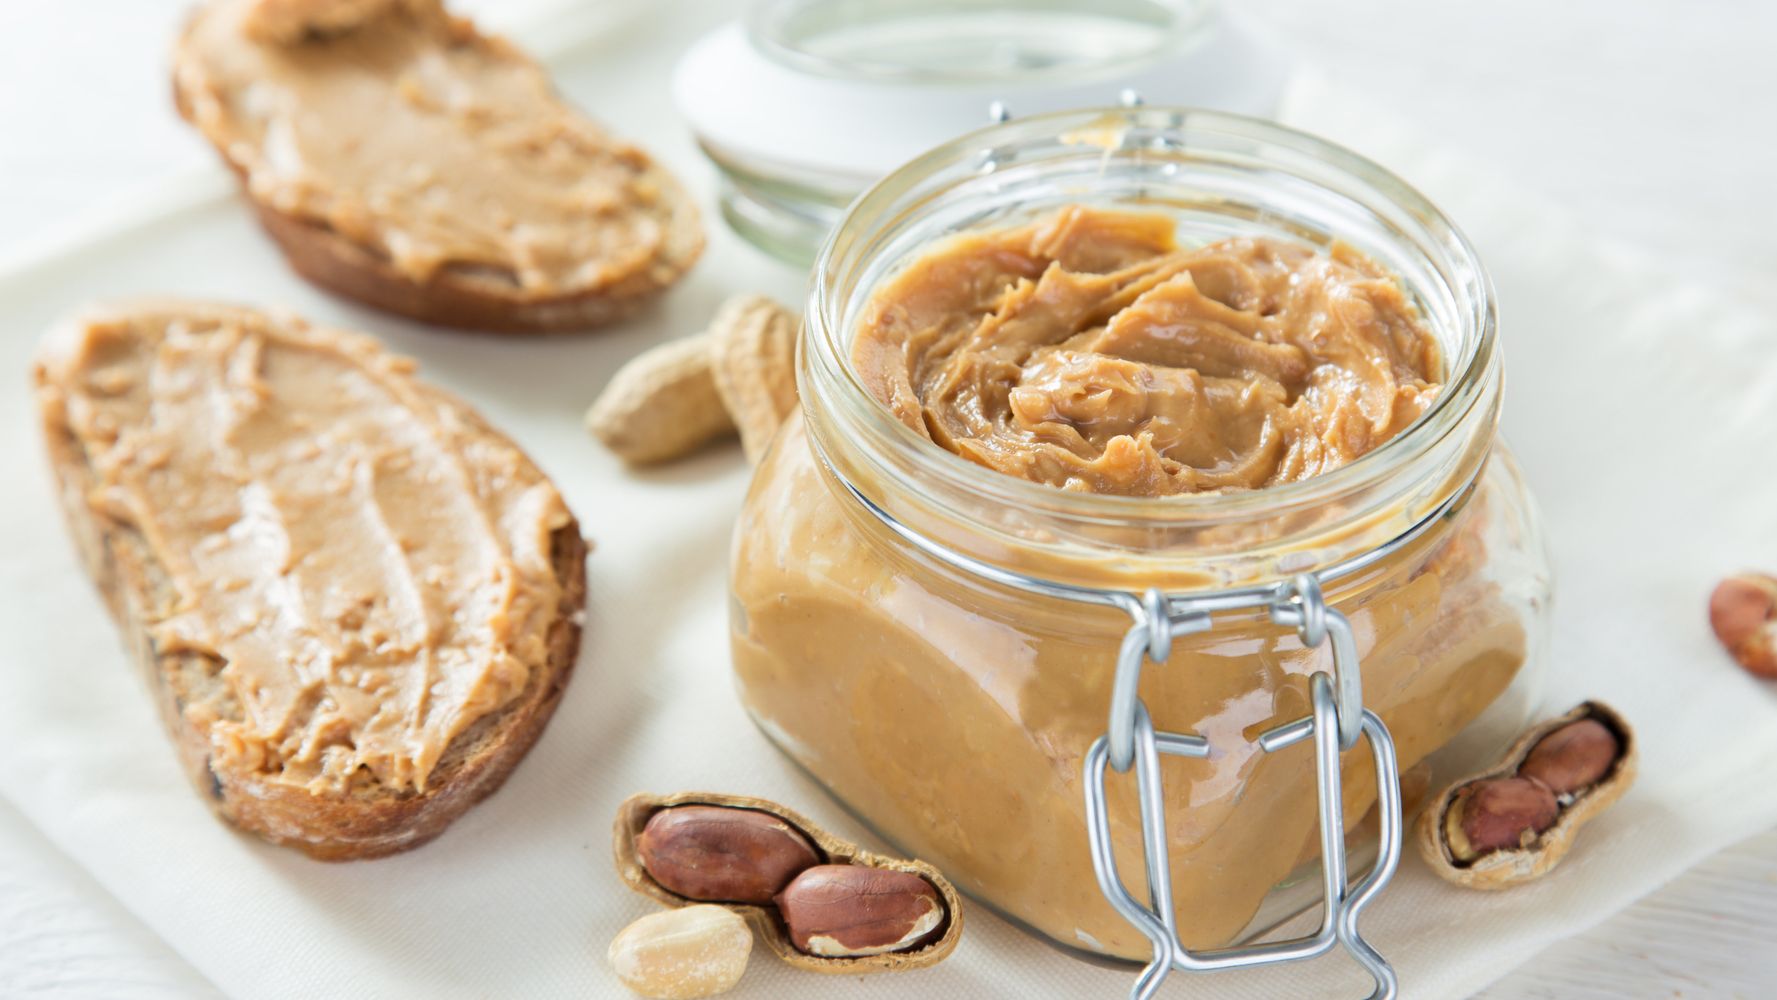 The Mixer Hack That Stirs Natural Peanut Butter Without The Hassle